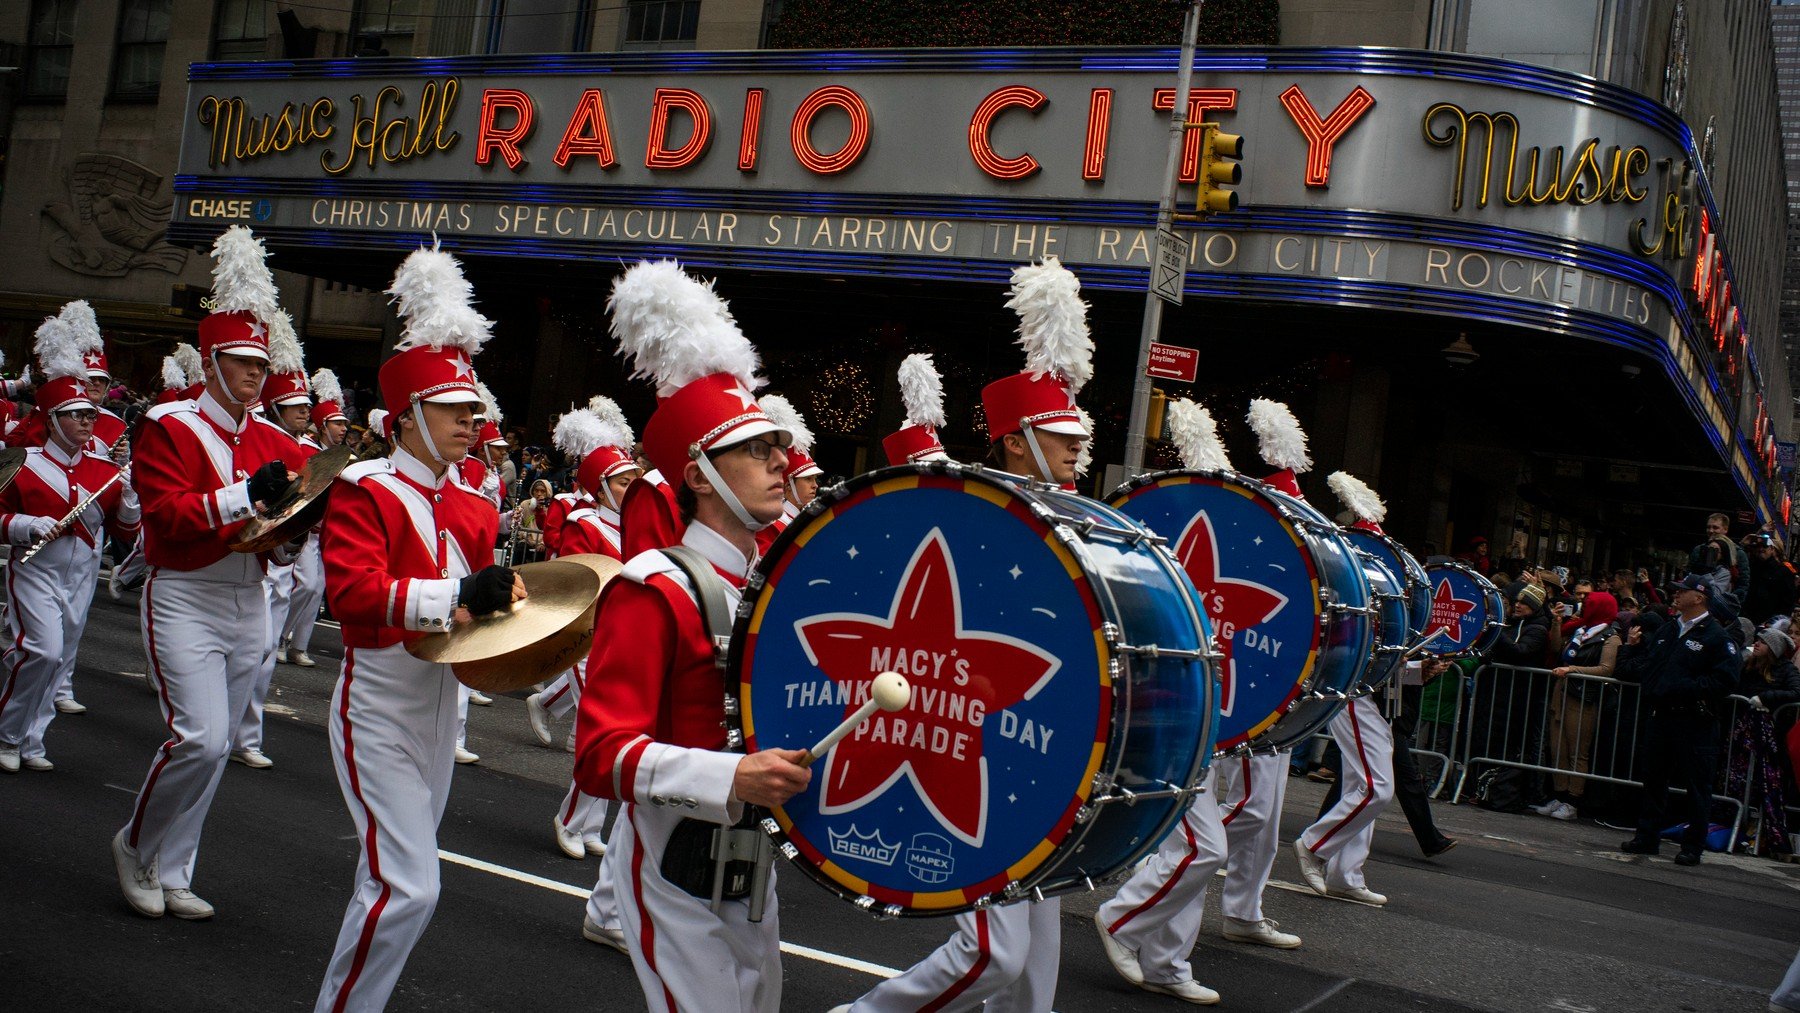 Performers Gear Up for the Macy’s Thanksgiving Day Parade Chicago